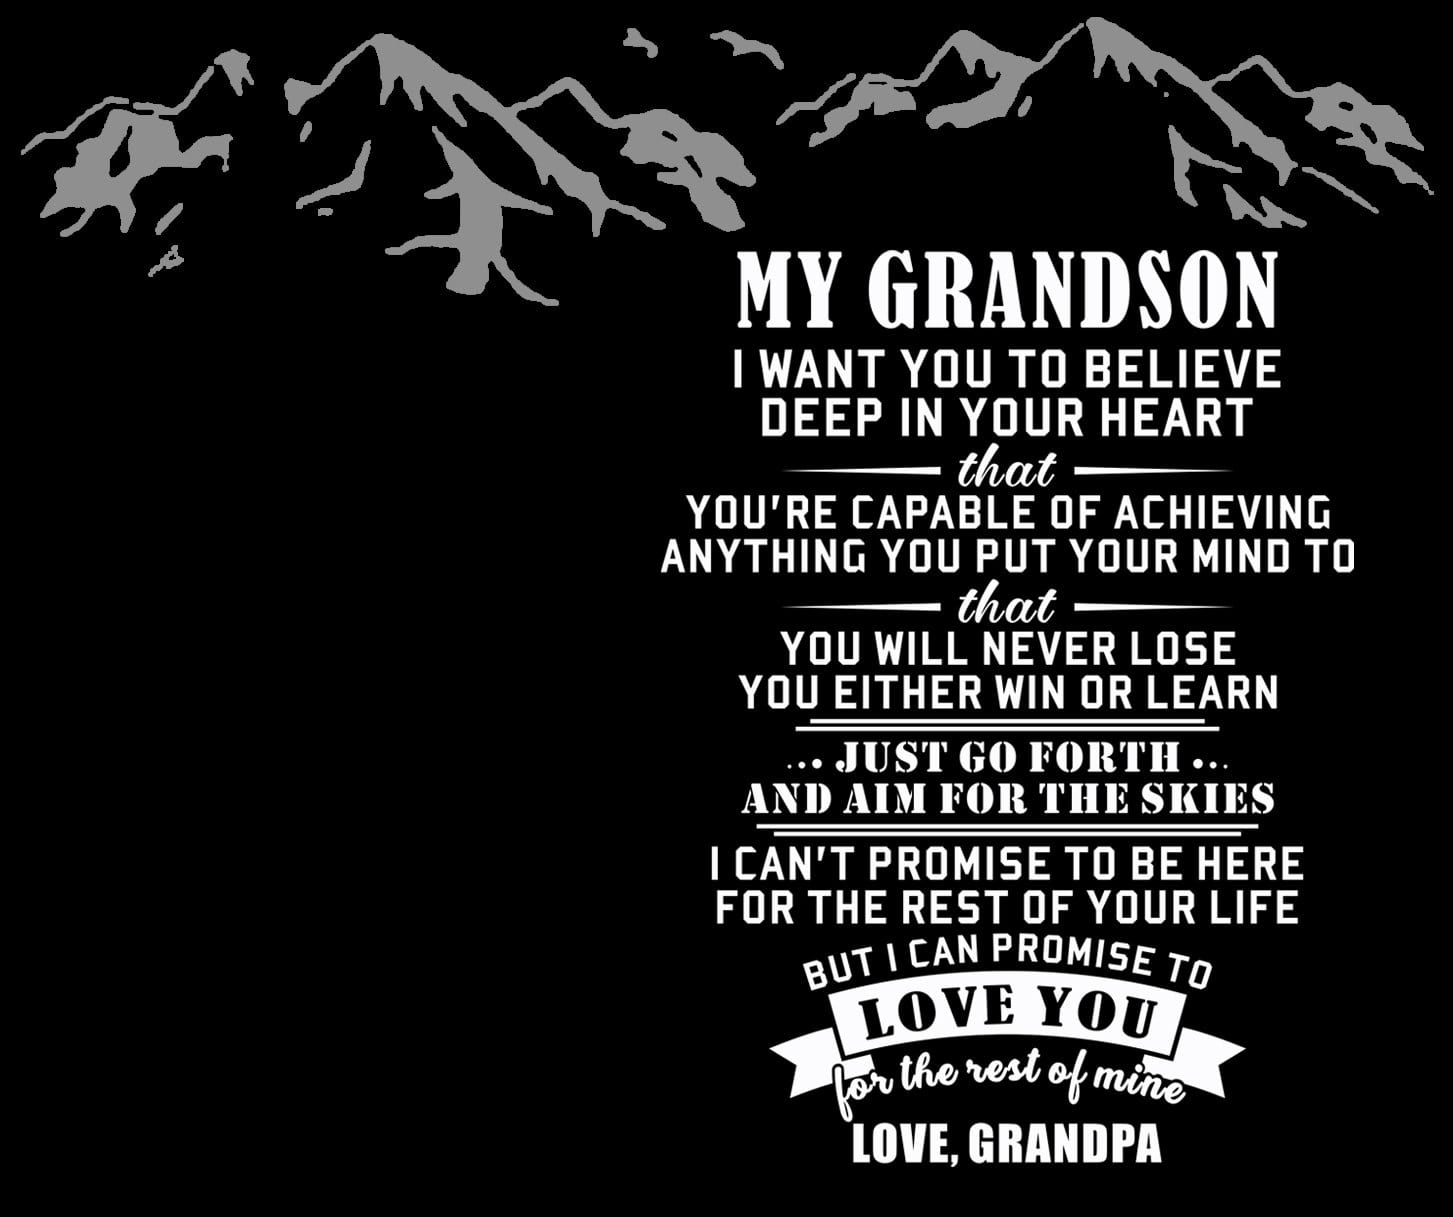 Fishing Hook Grandpa To Grandson - You Are The Greatest Catch Of My Life Engraved Fishing Lure GiveMe-Gifts